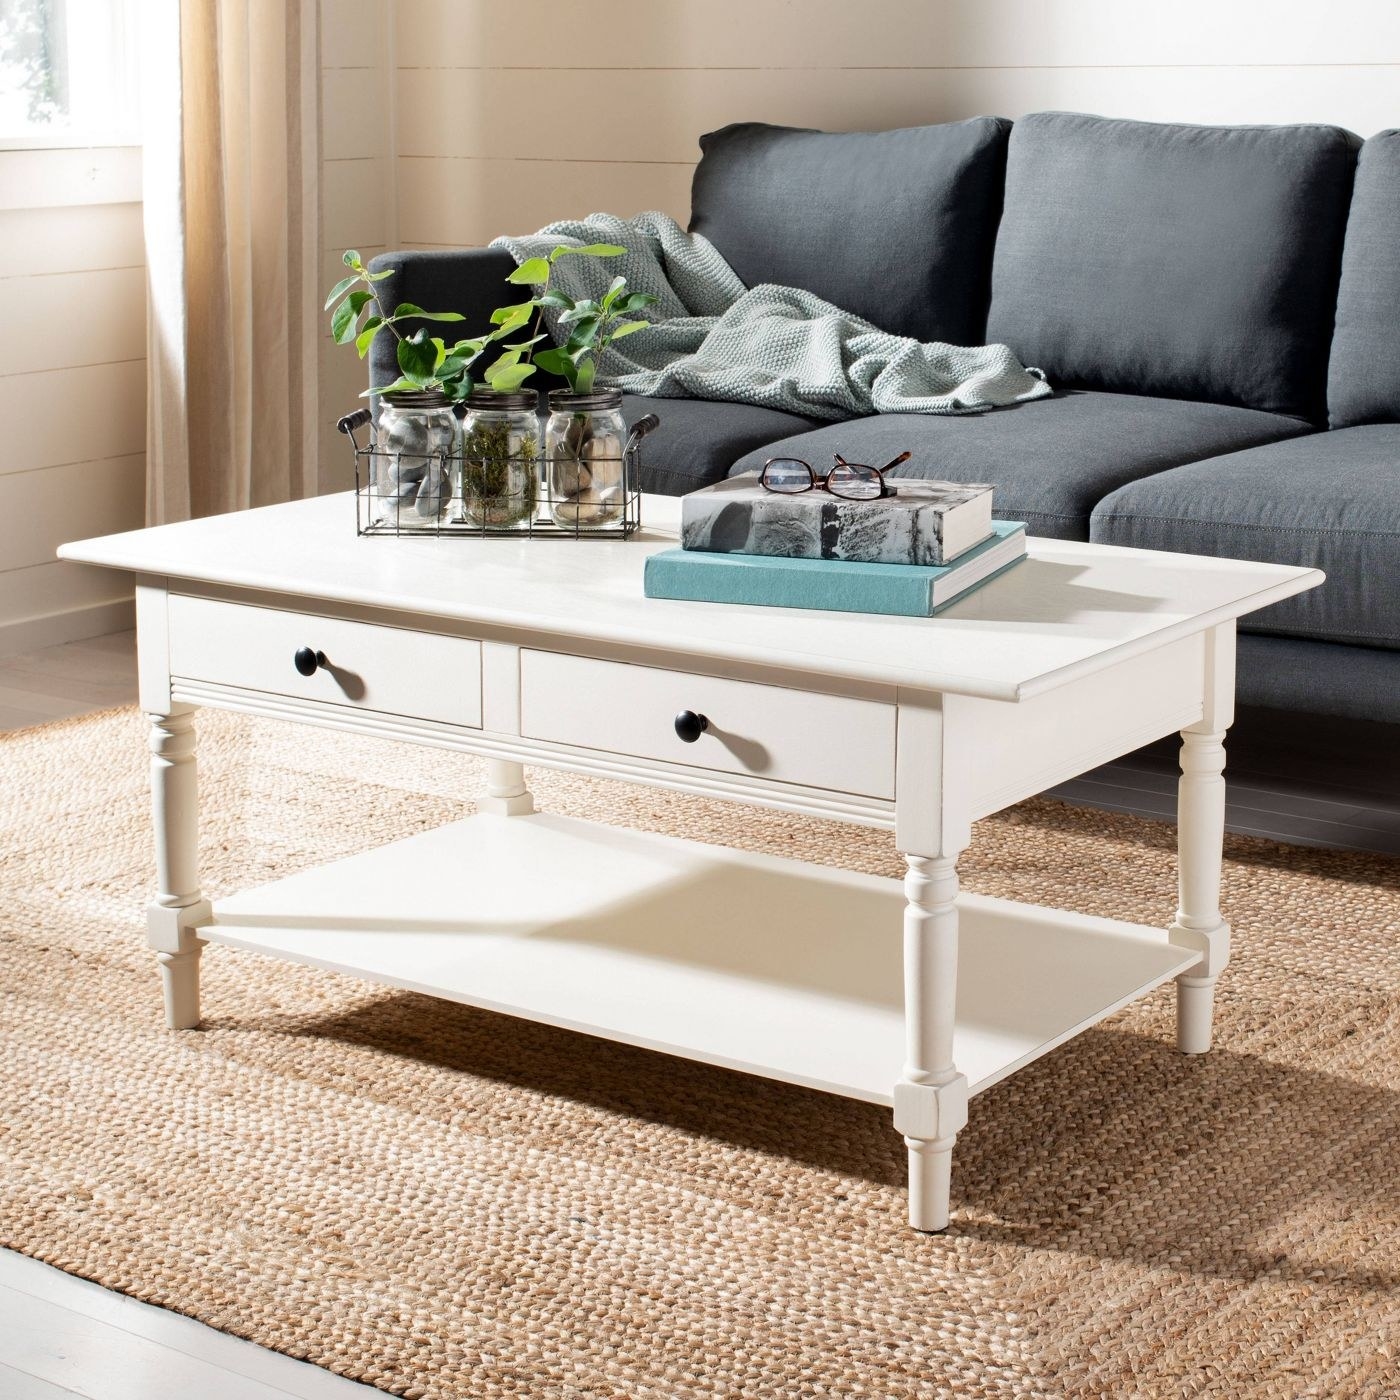 The table in the cream color